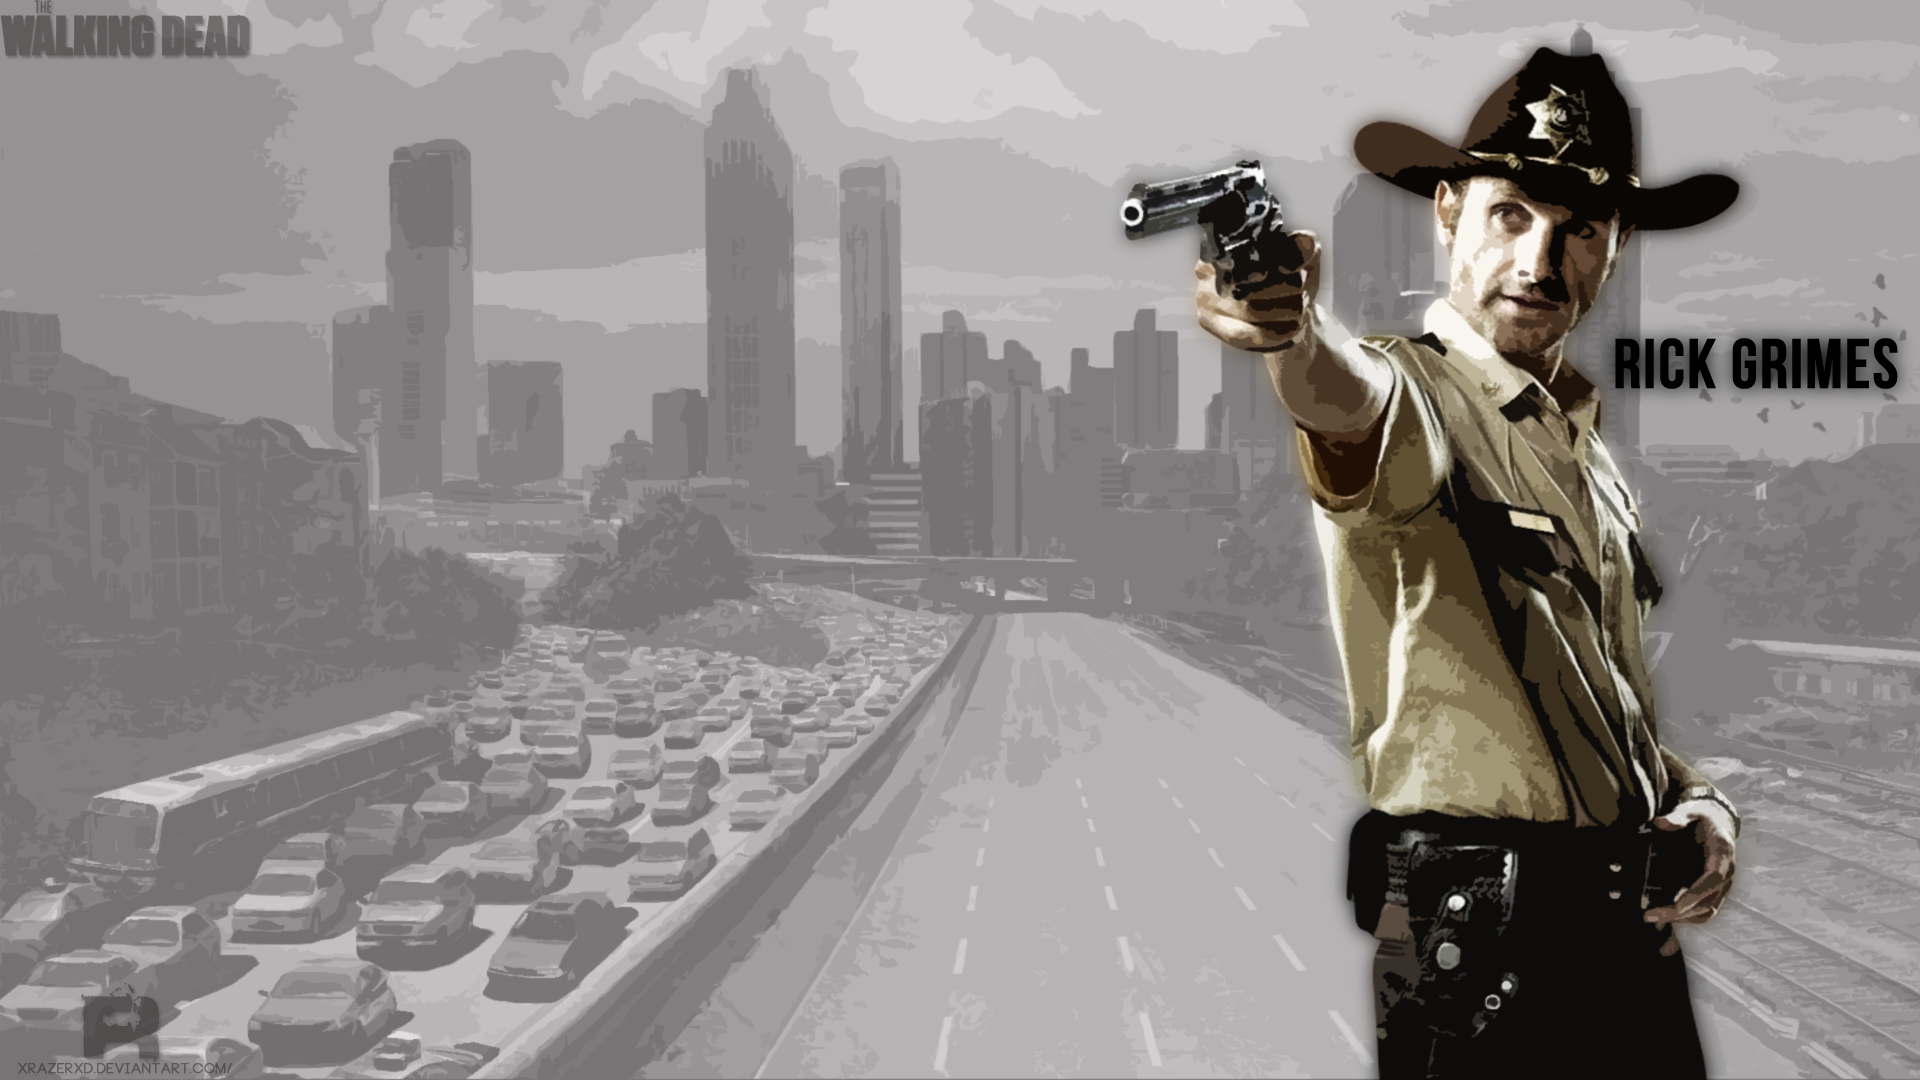 General 1920x1080 The Walking Dead Rick Grimes TV series Andrew Lincoln weapon revolver gun hat